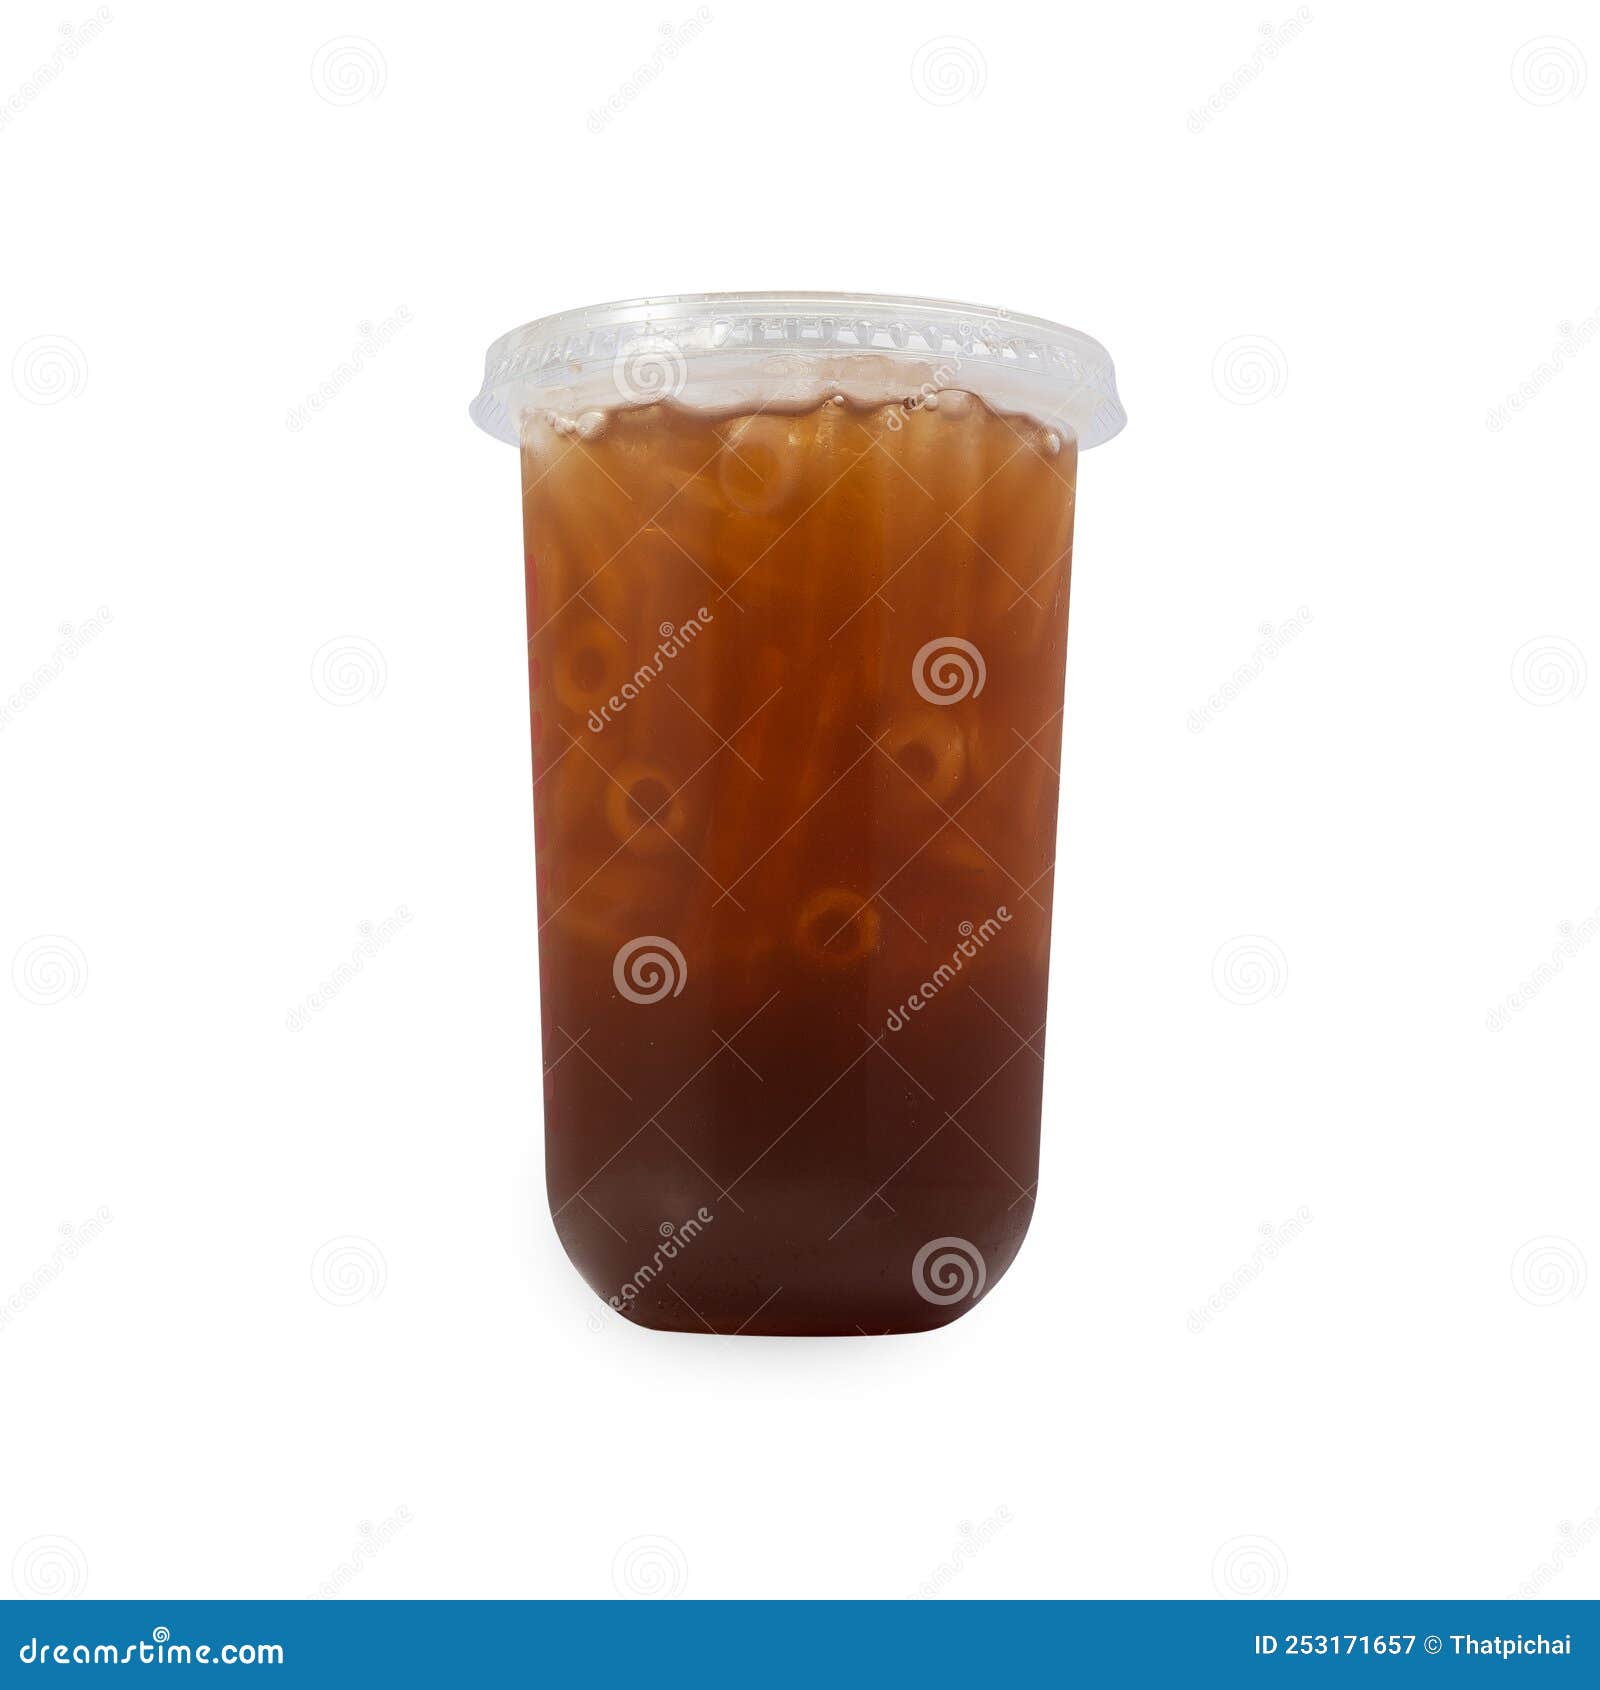 https://thumbs.dreamstime.com/z/ice-tea-clear-plastic-glass-isolated-white-background-clipping-path-253171657.jpg